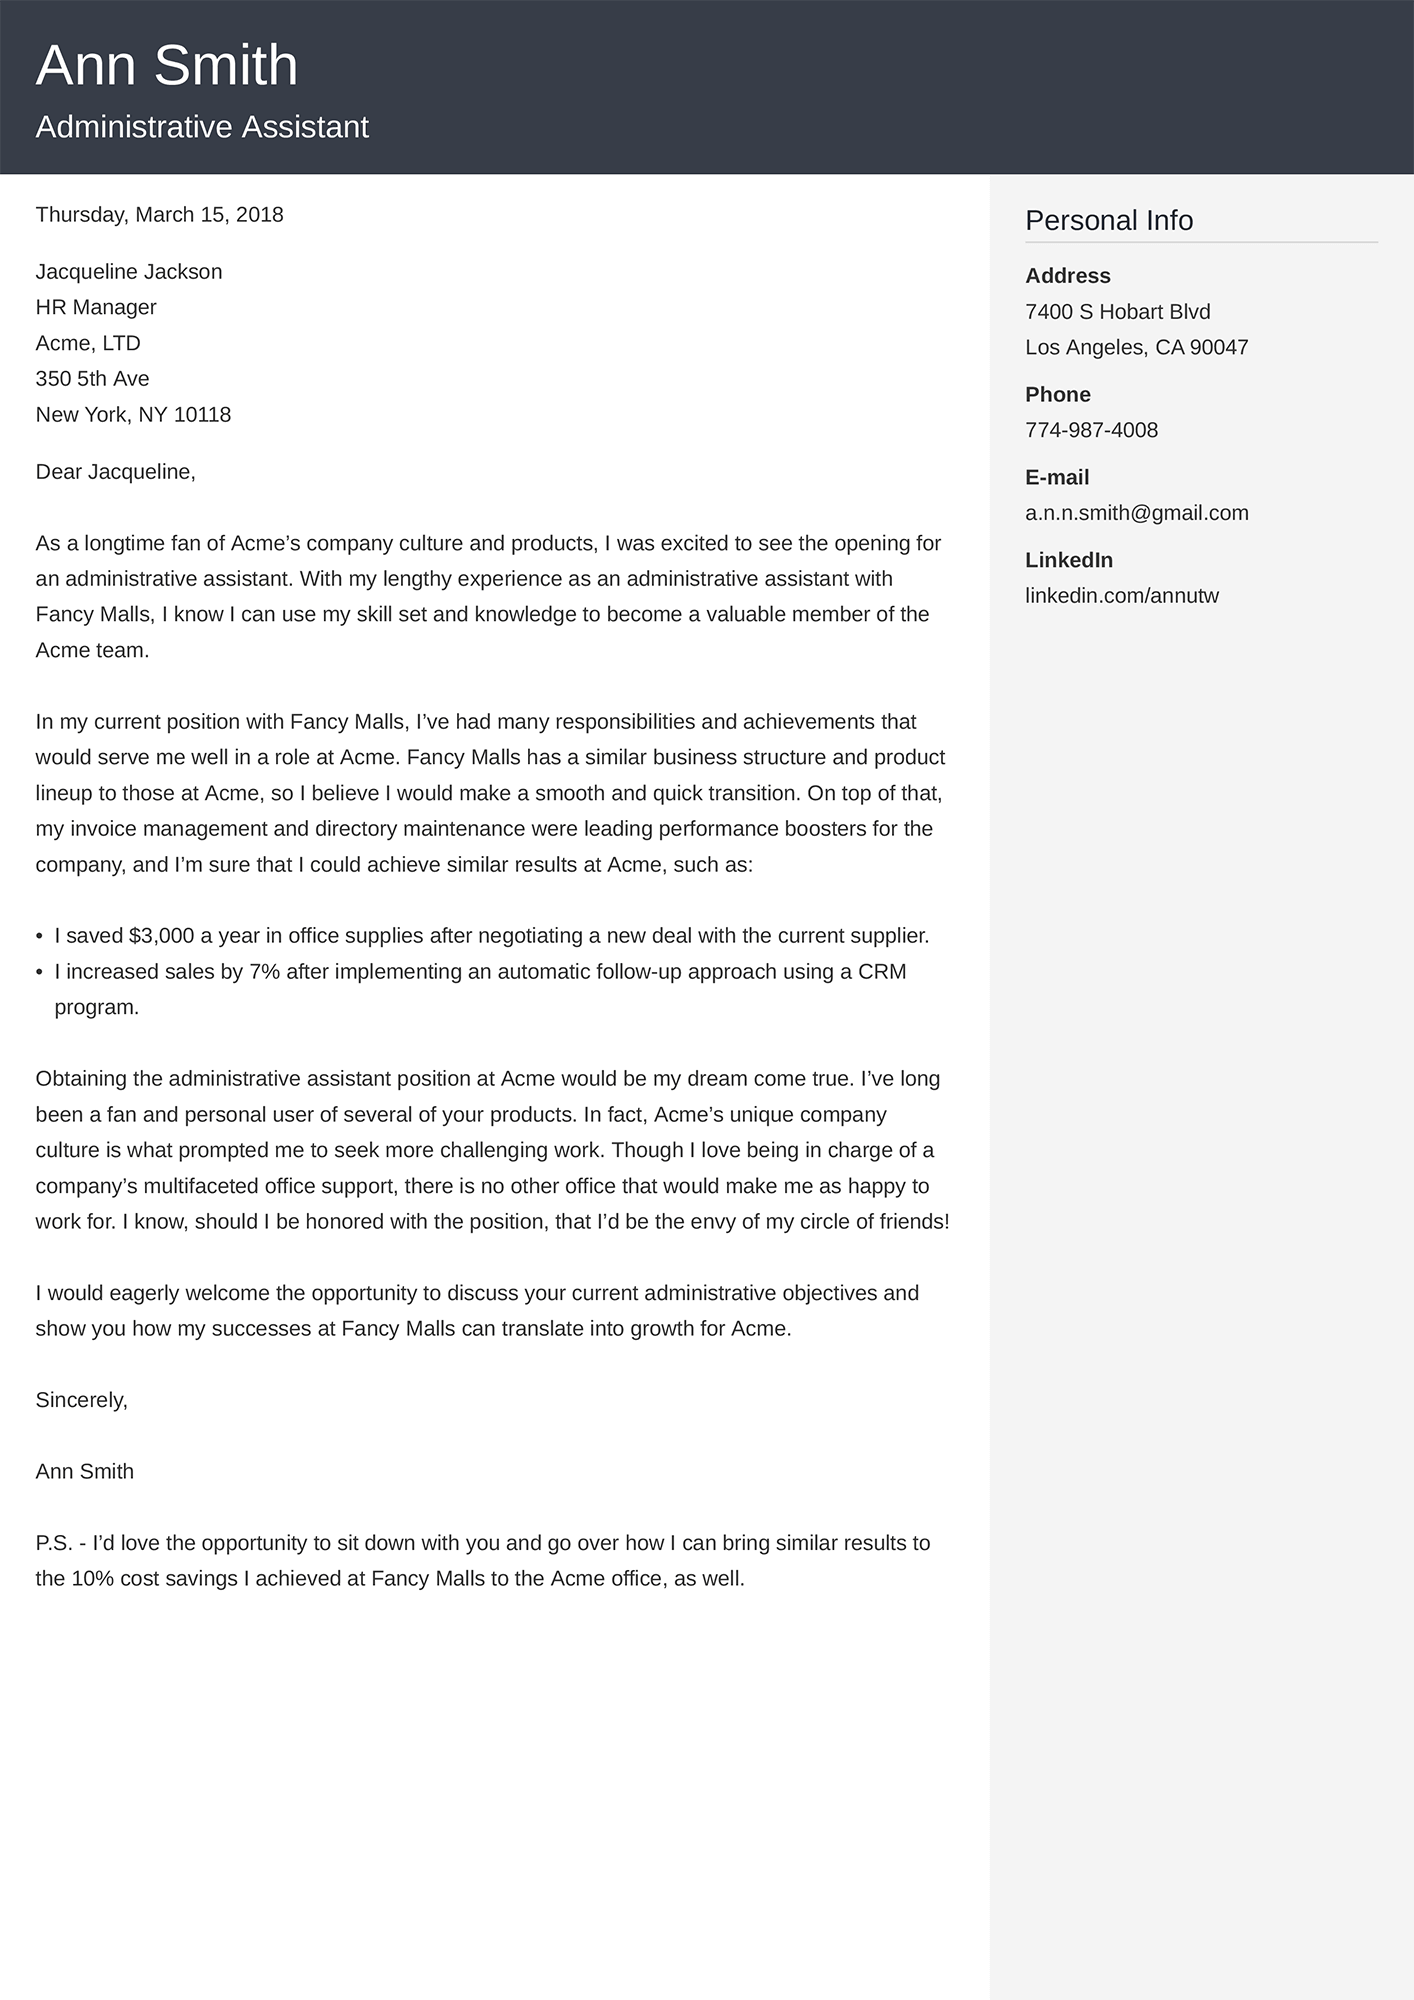 Career Change Cover Letter Template from cdn-images.zety.com